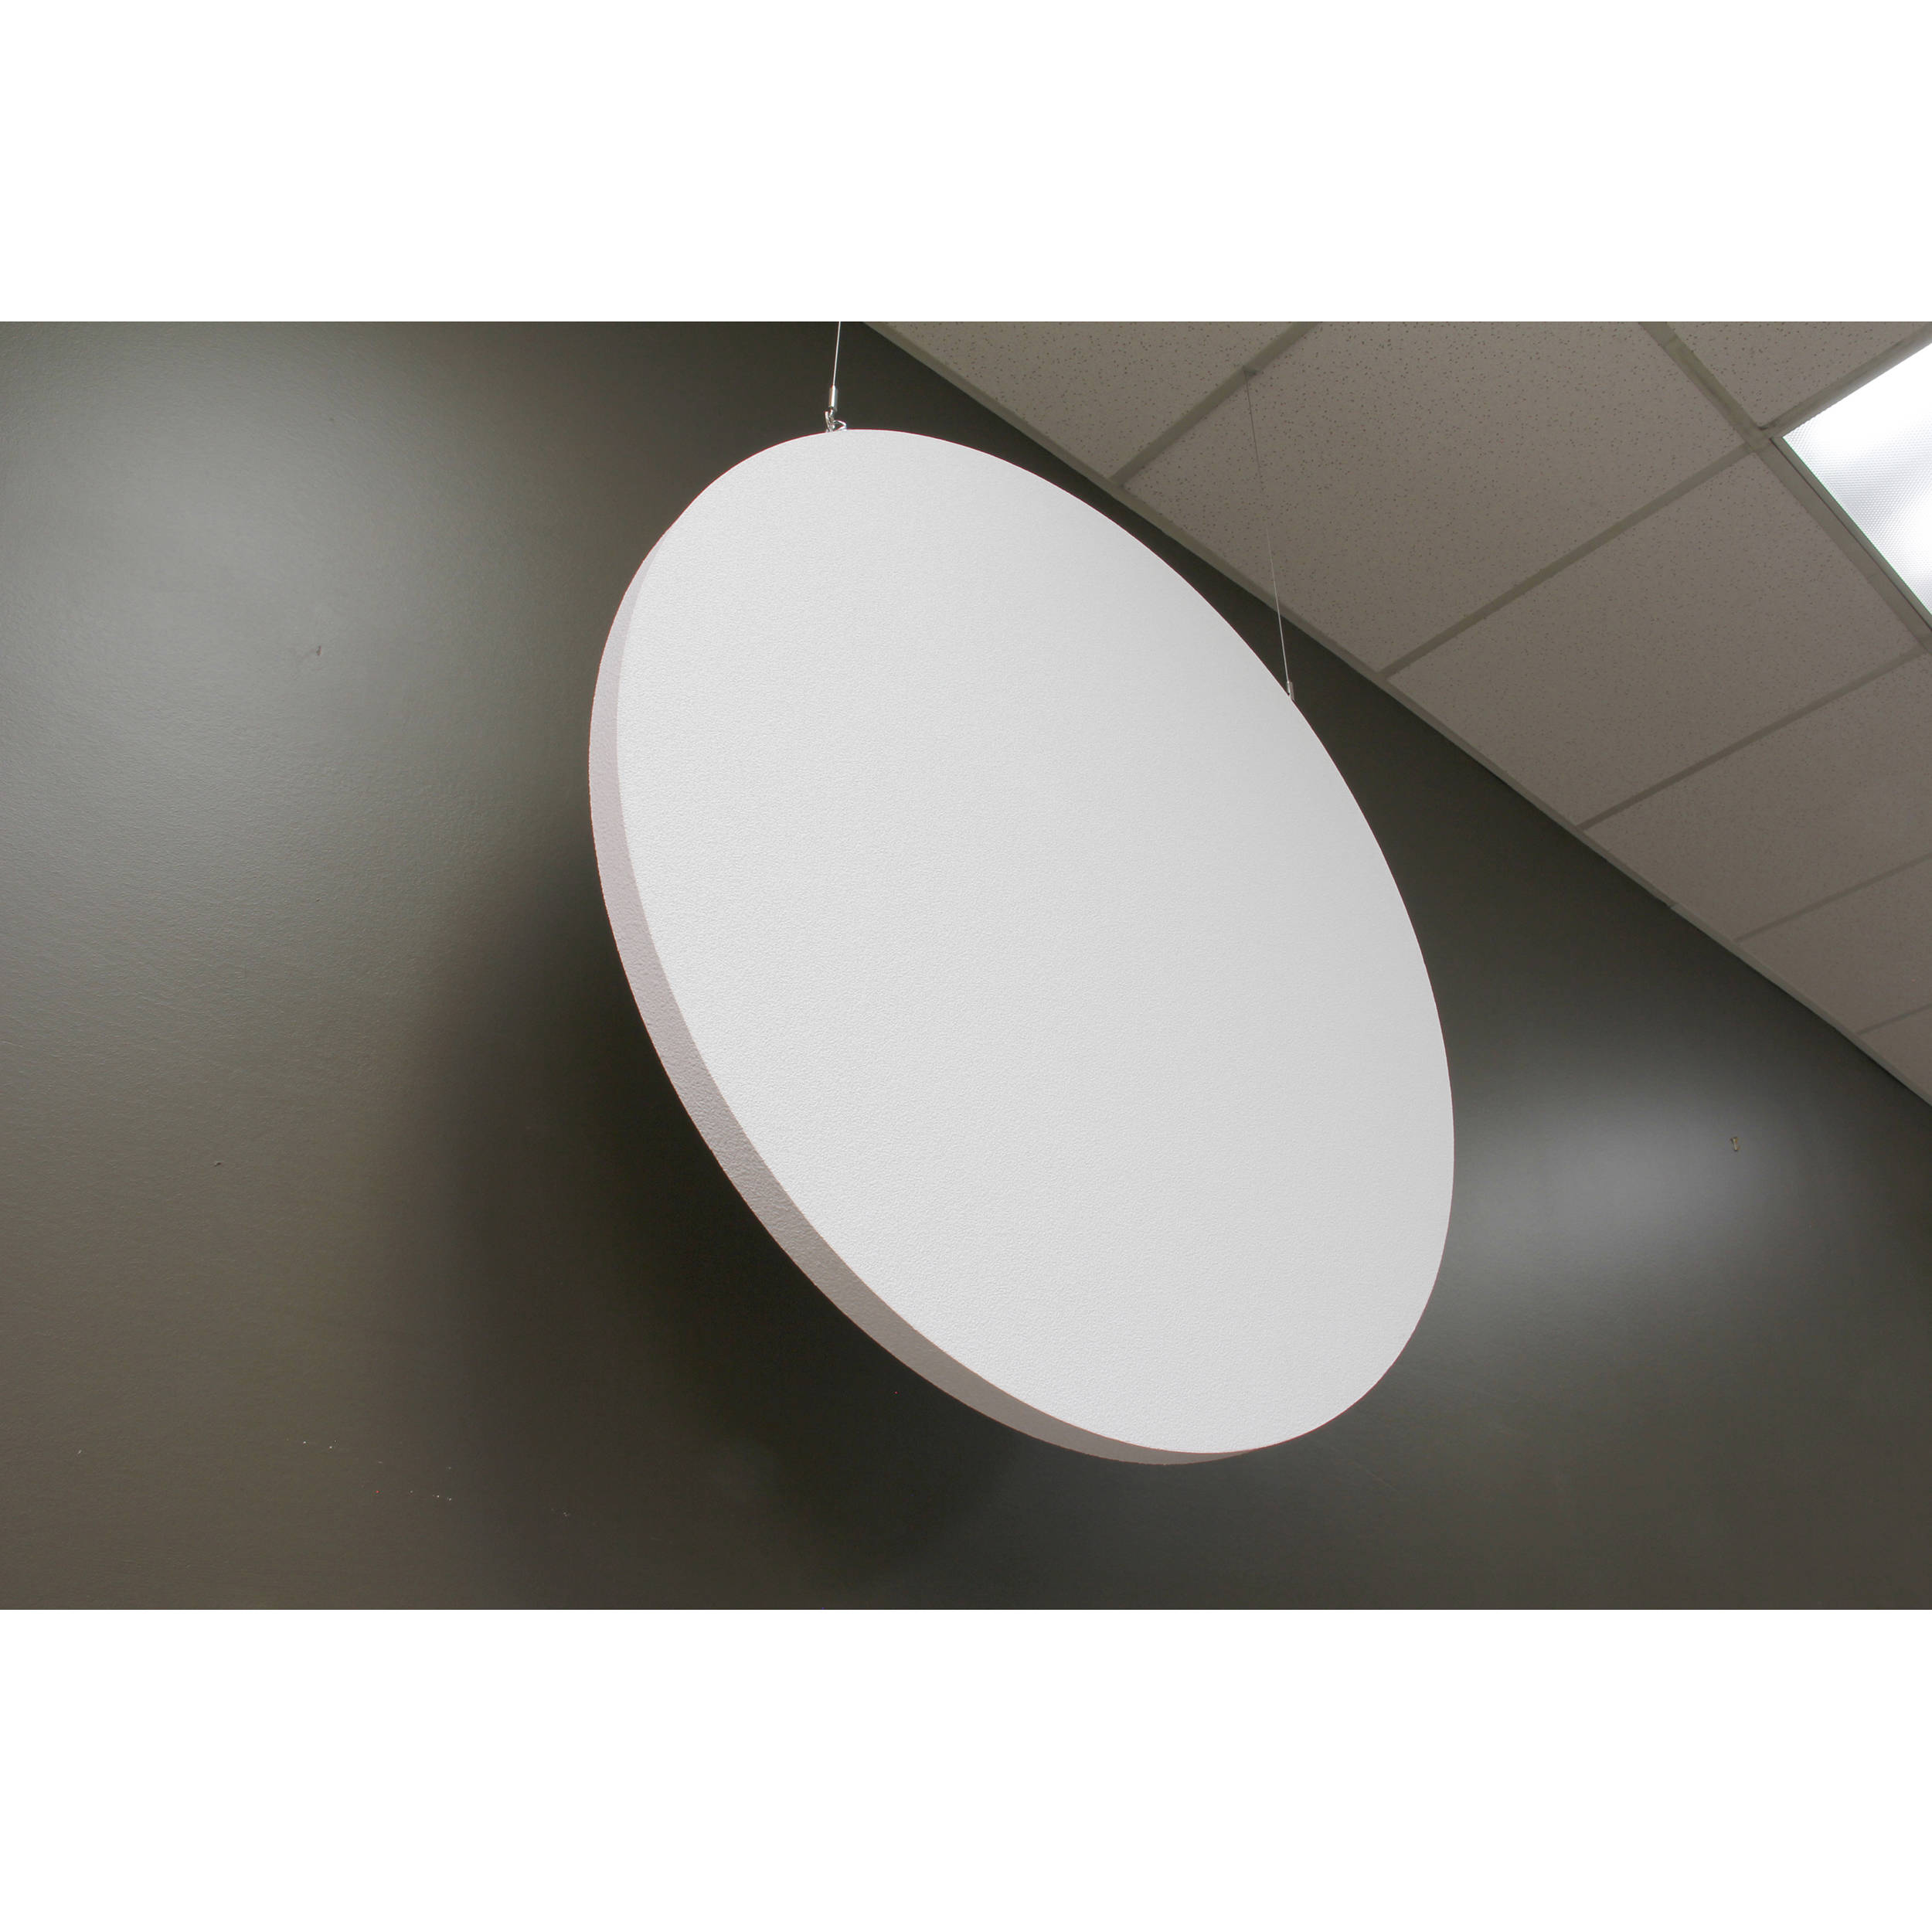 Circular Acoustic Ceiling Panels - Room Pictures & All About Home